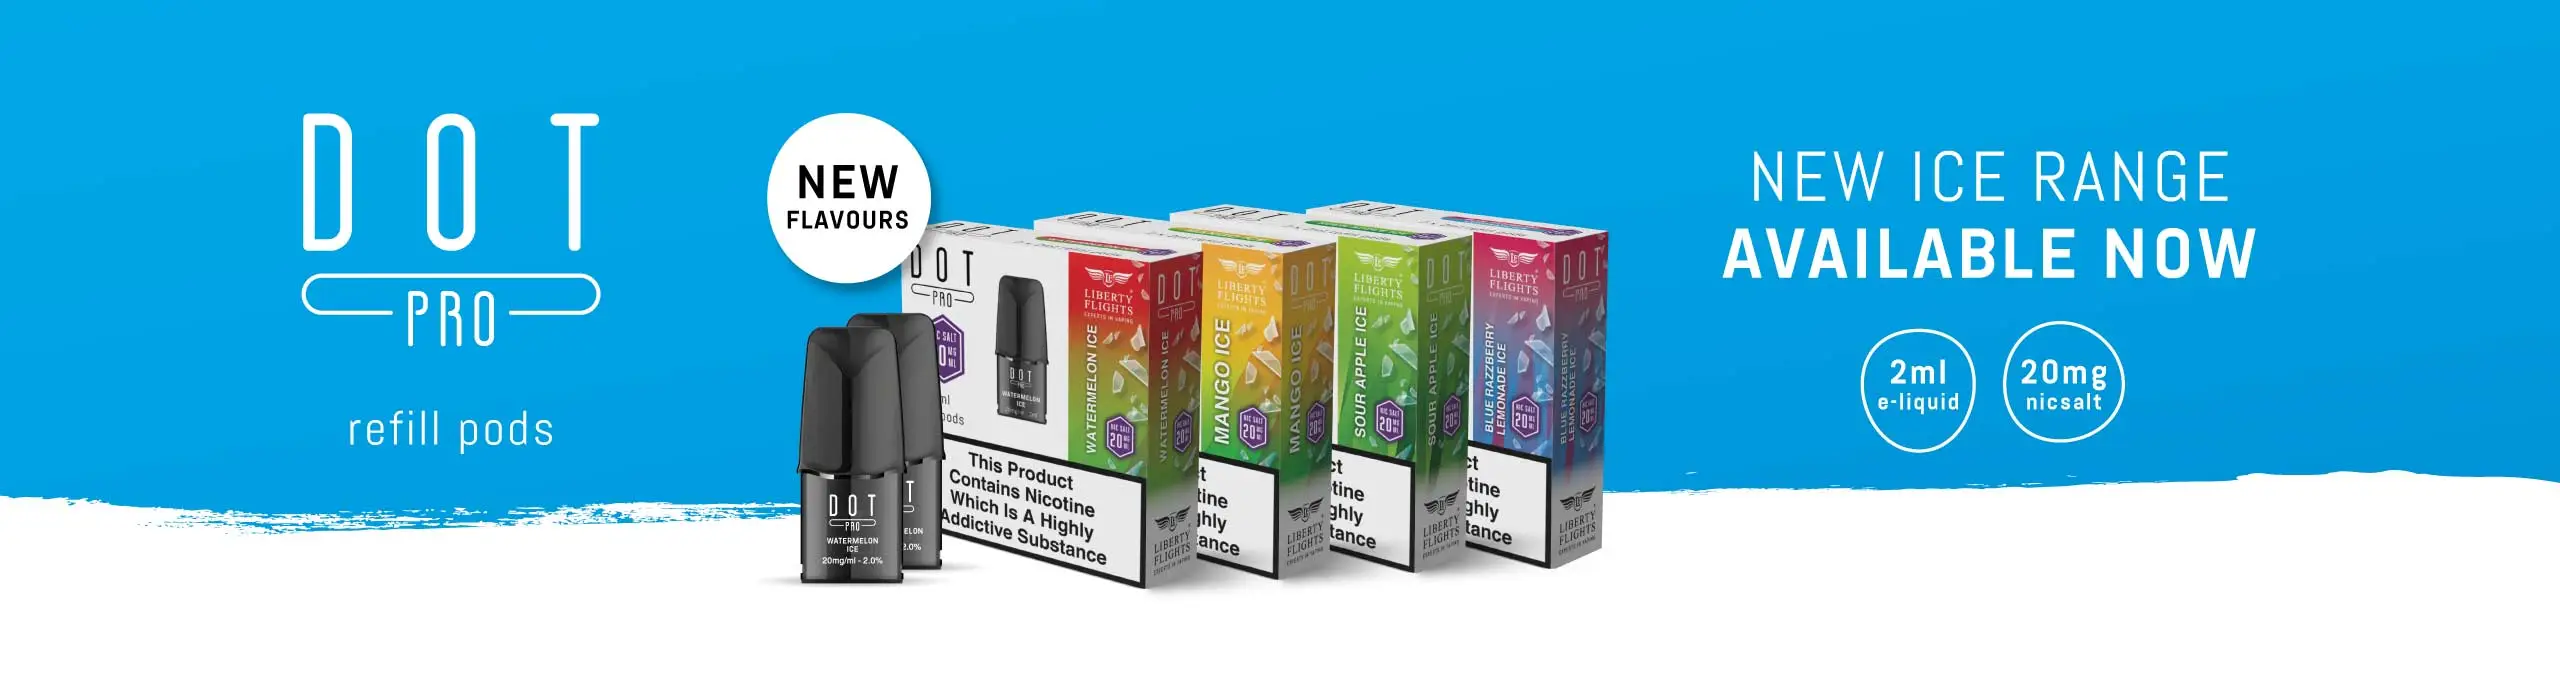 New Dot Pro Flavours